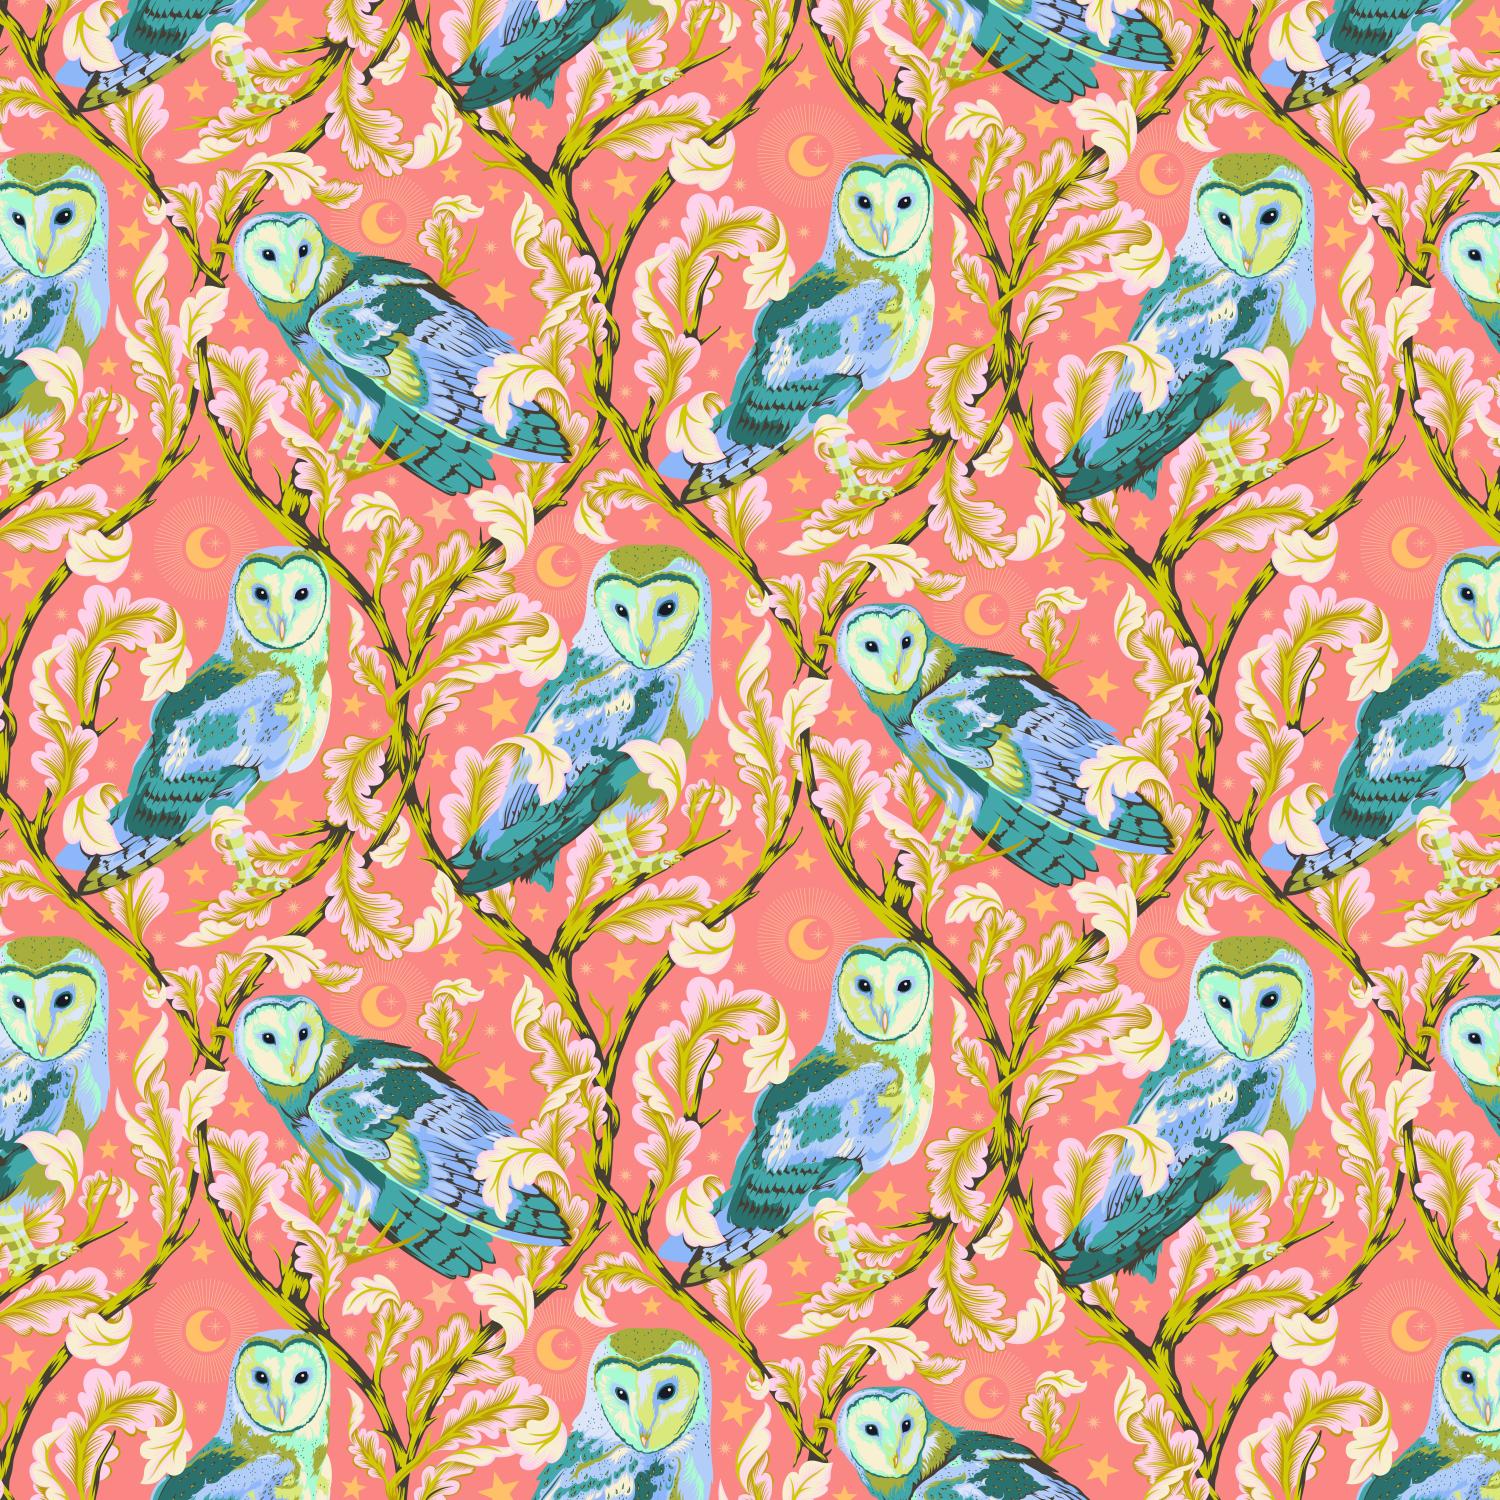 FREE SPIRIT - Tula Pink - Owl - Petunia - PWTP117.PETUN 884424239259 -  Quilt in a Day / Quilt Fabric